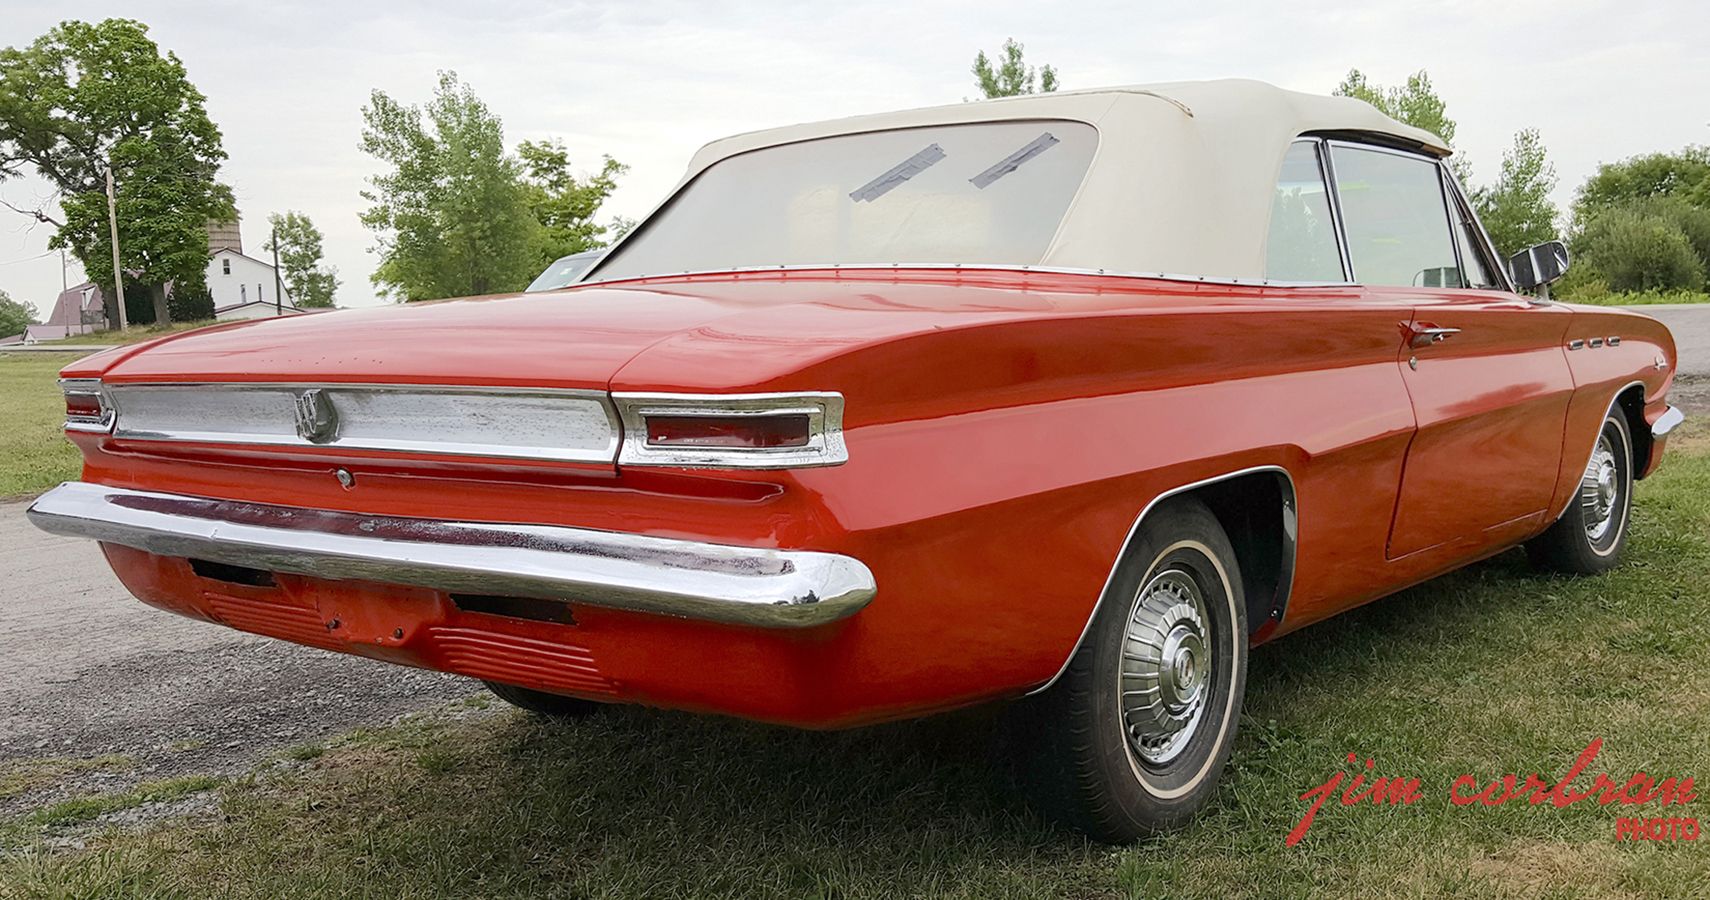 In 1962, The Buick Special Did Something Nearly Unheard Of In The American Automobile Industry - It Got A New Engine, Dubbed The Fireball And This Was A V6